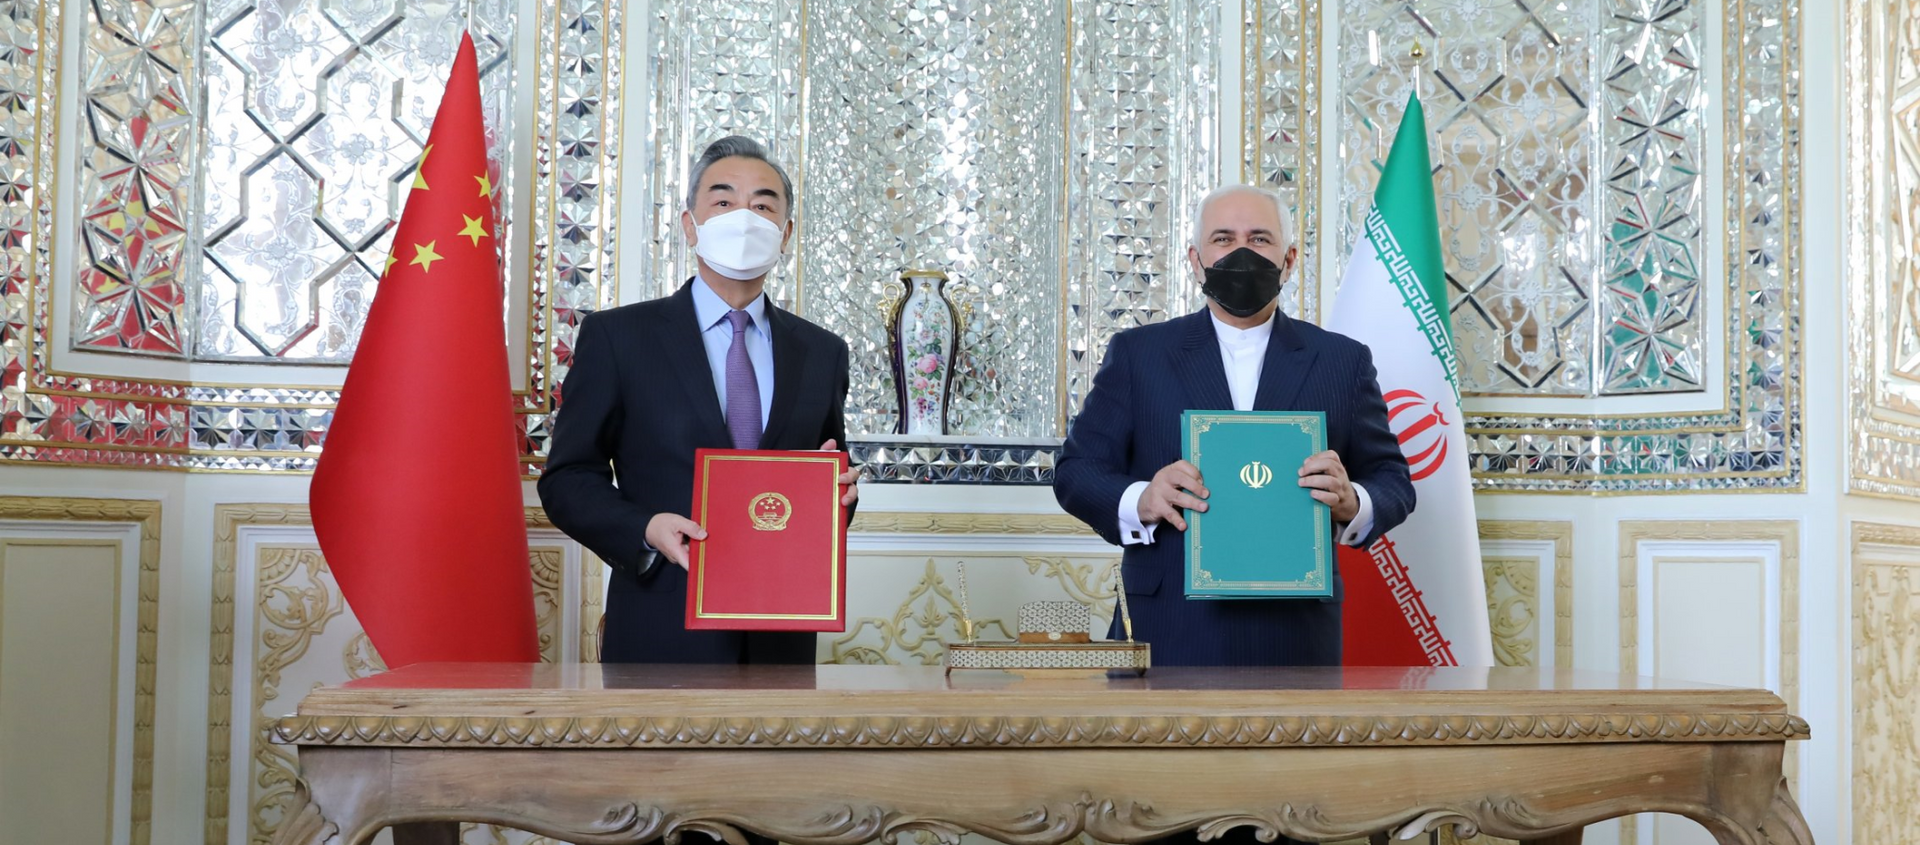 Chinese Foreign Minister Wang Yi and Iranian Foreign Minister Mohammad Javad Zarif sign 'historic' 25-year strategic partnership roadmap. - Sputnik International, 1920, 27.03.2021